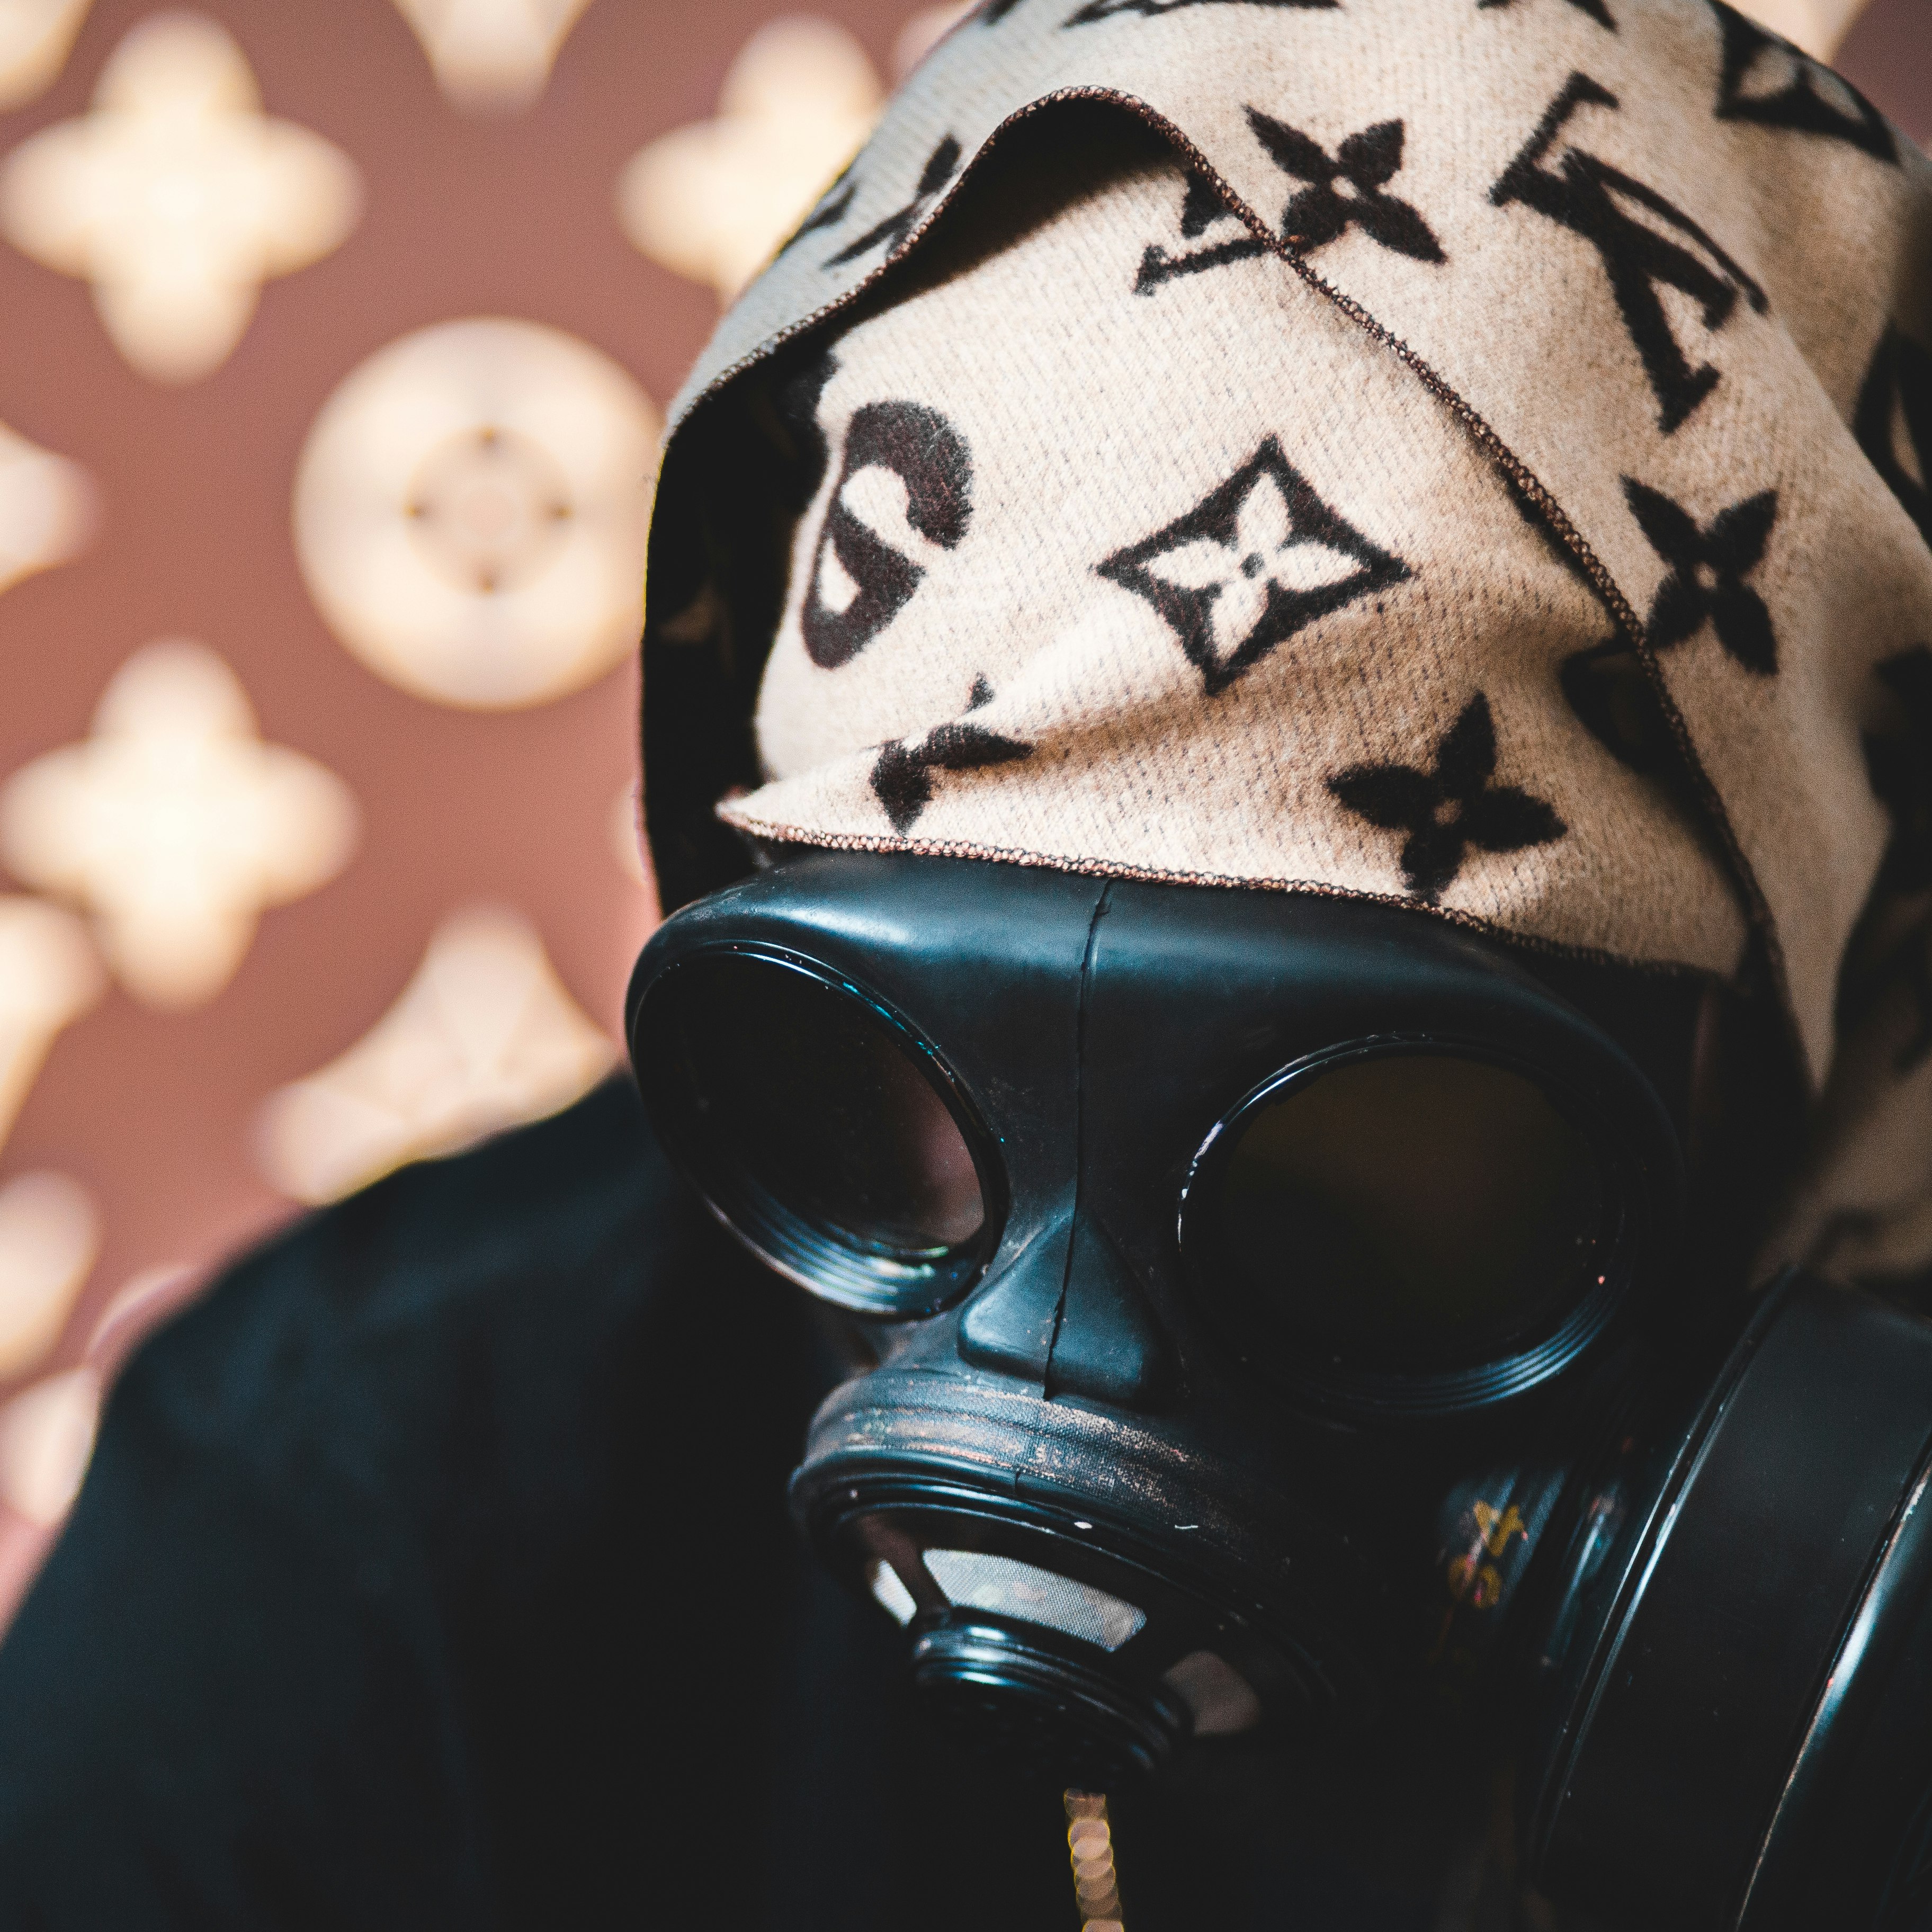 person wearing black and white knit cap and gas mask